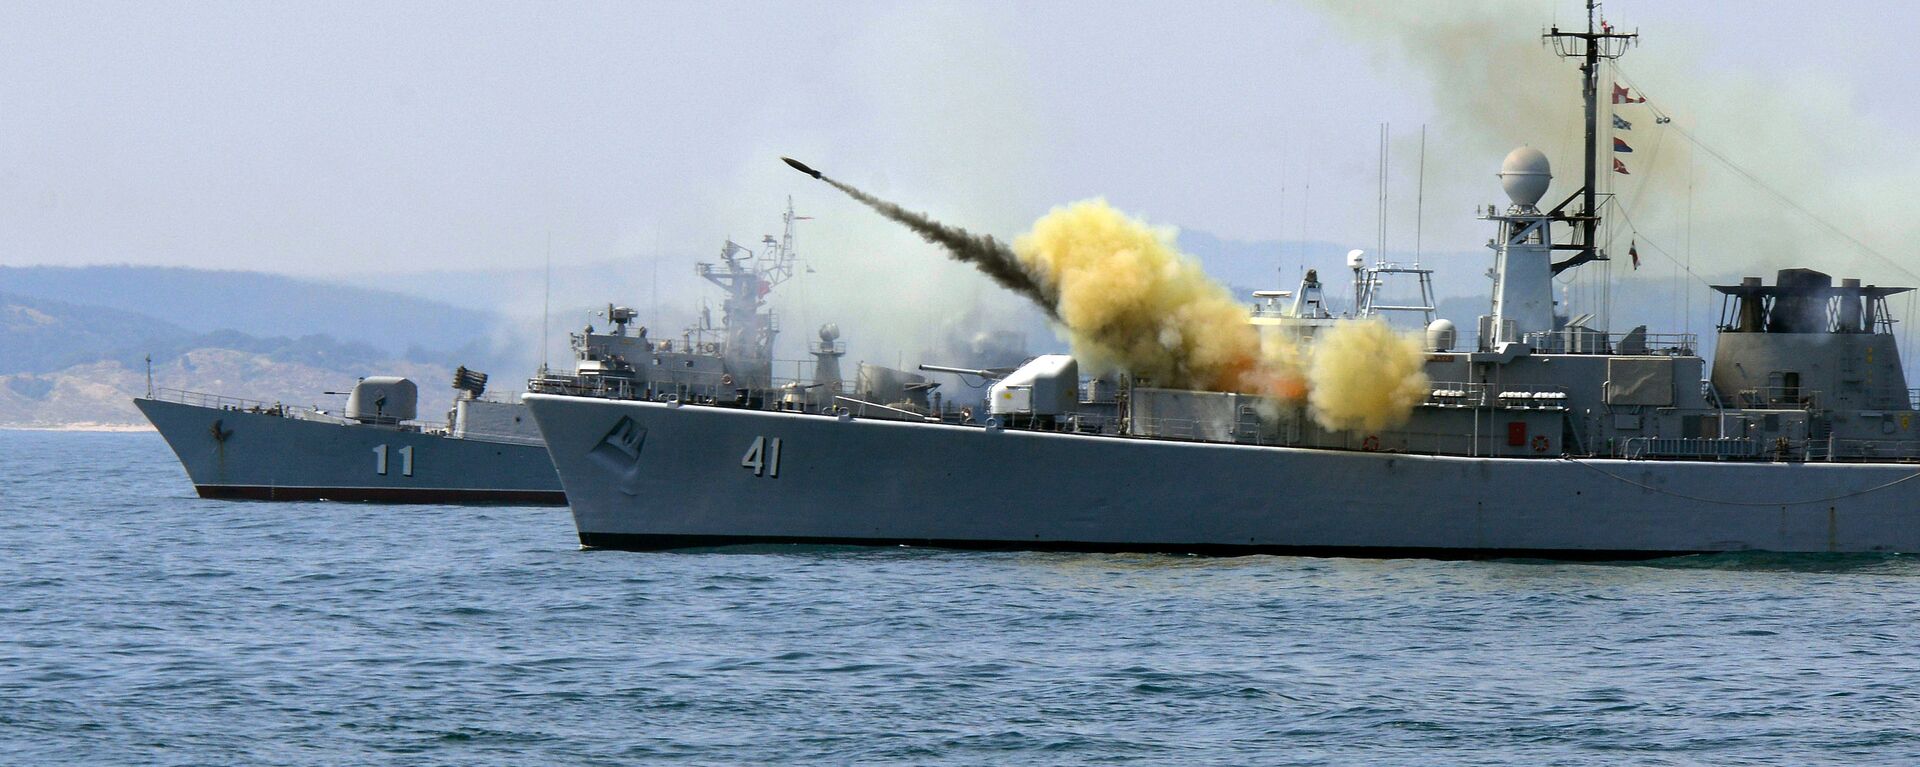 An anti-submarine rocket blasts off a rocket launcher from the Bulgarian navy frigate Drazki during the BREEZE 2014 military drill in the Black Sea - Sputnik International, 1920, 21.01.2024